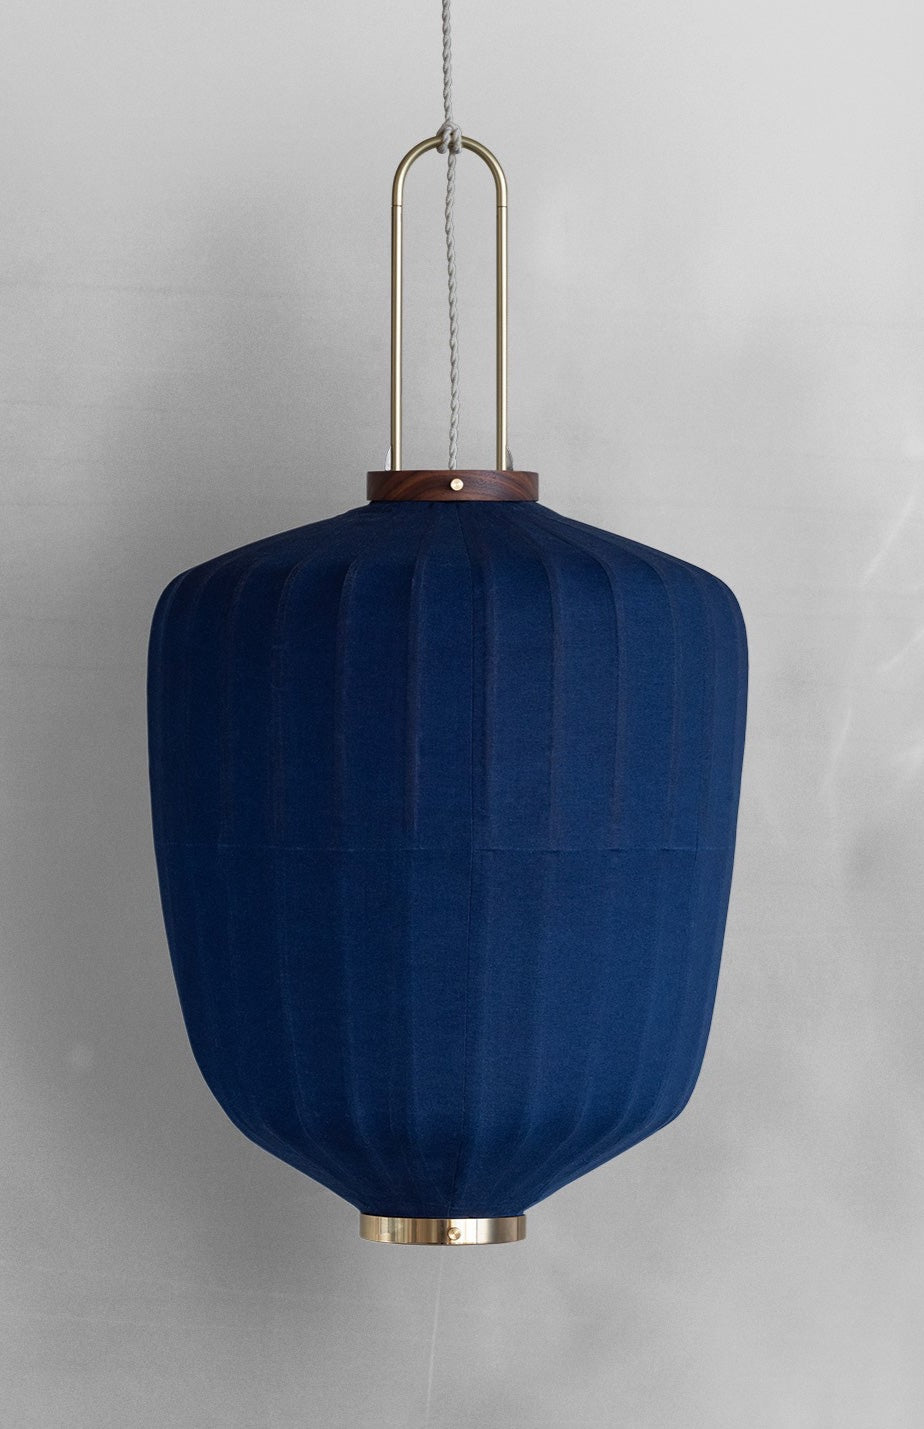 The Tuolo shape Plant Dyed Lantern Blue by Taiwan Lantern.